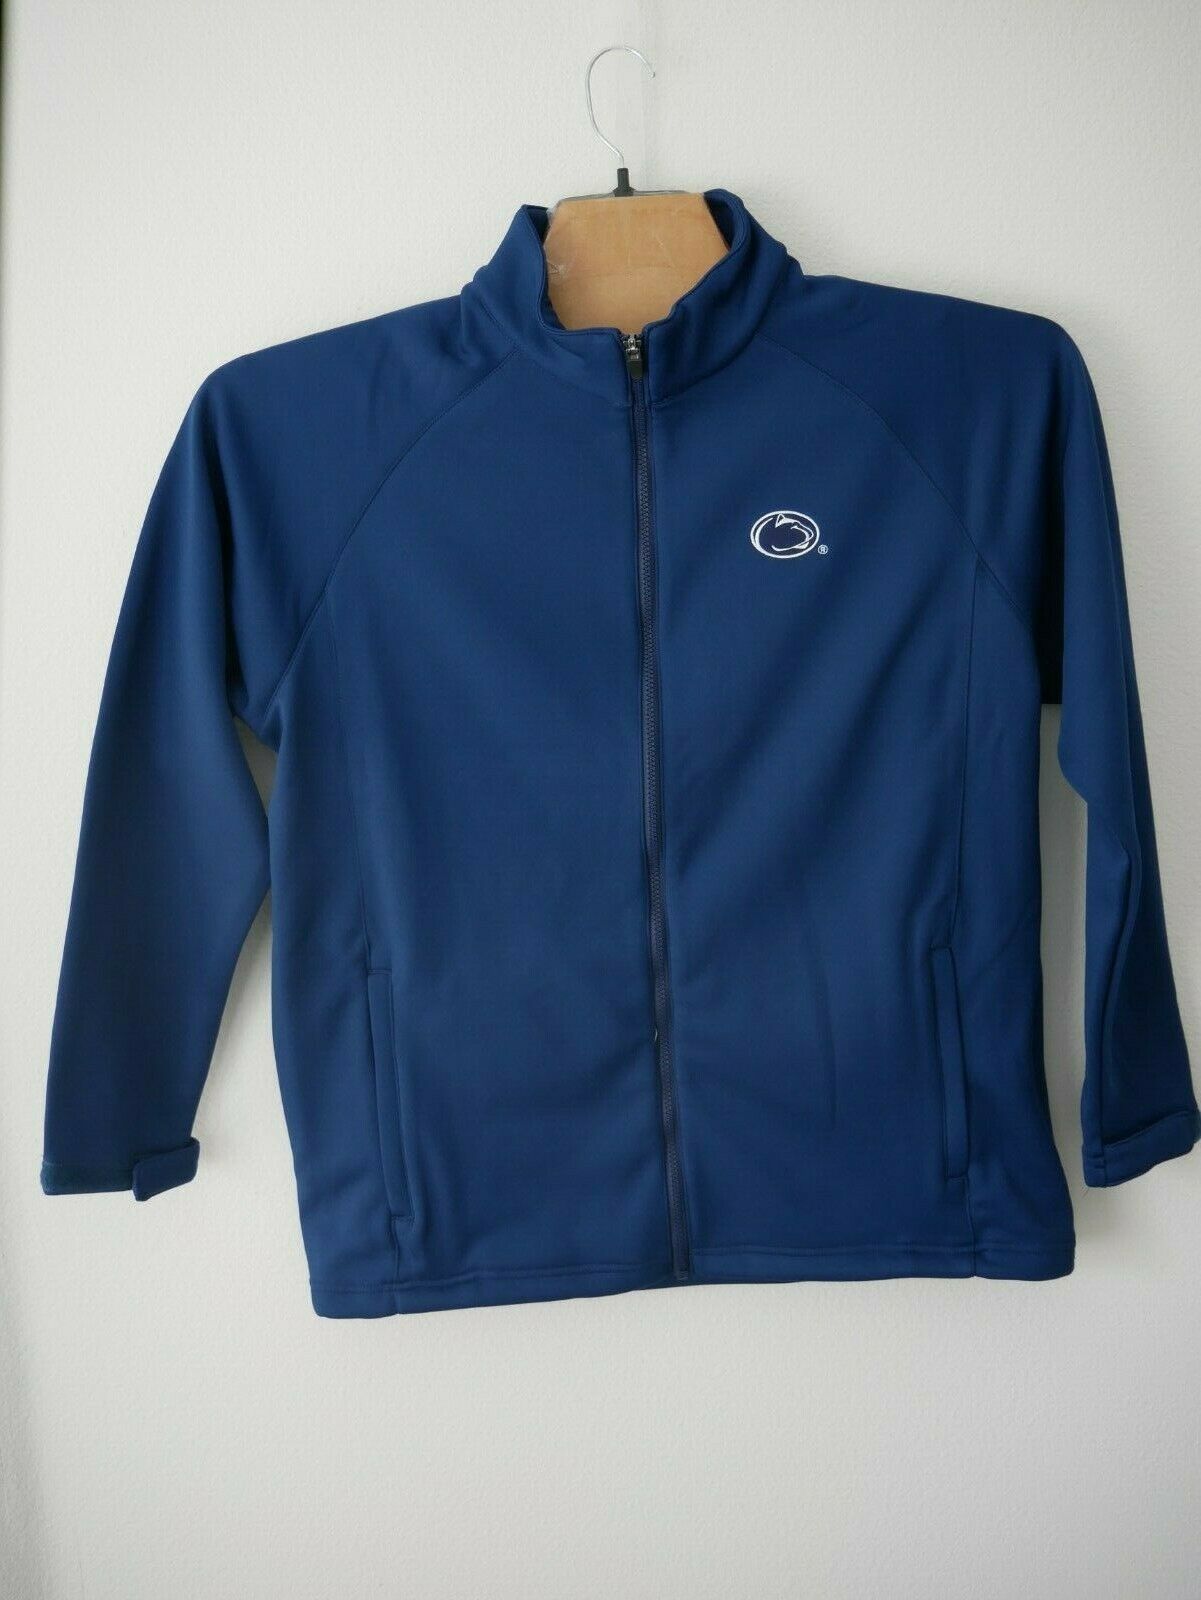 Primary image for Crable NCAA Penn State Nittany Lions Mens Full Zip Bonded Jacket Navy Sz L NWT